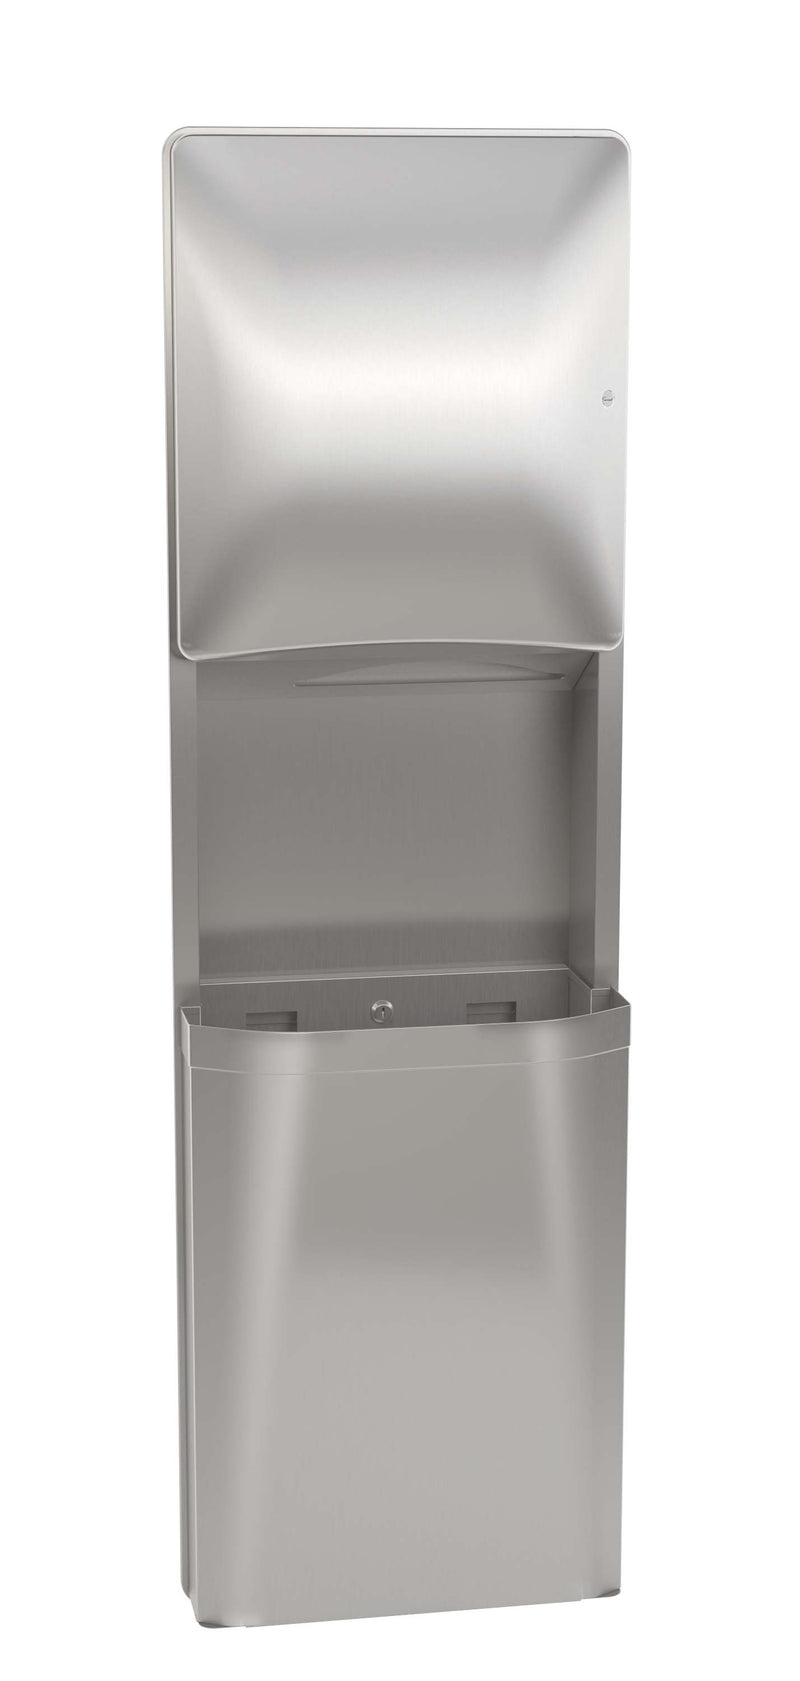 Bradley 2A95-1136 Paper Towel Dispenser Waste Receptacle, 21 Gal, Surface Mounted